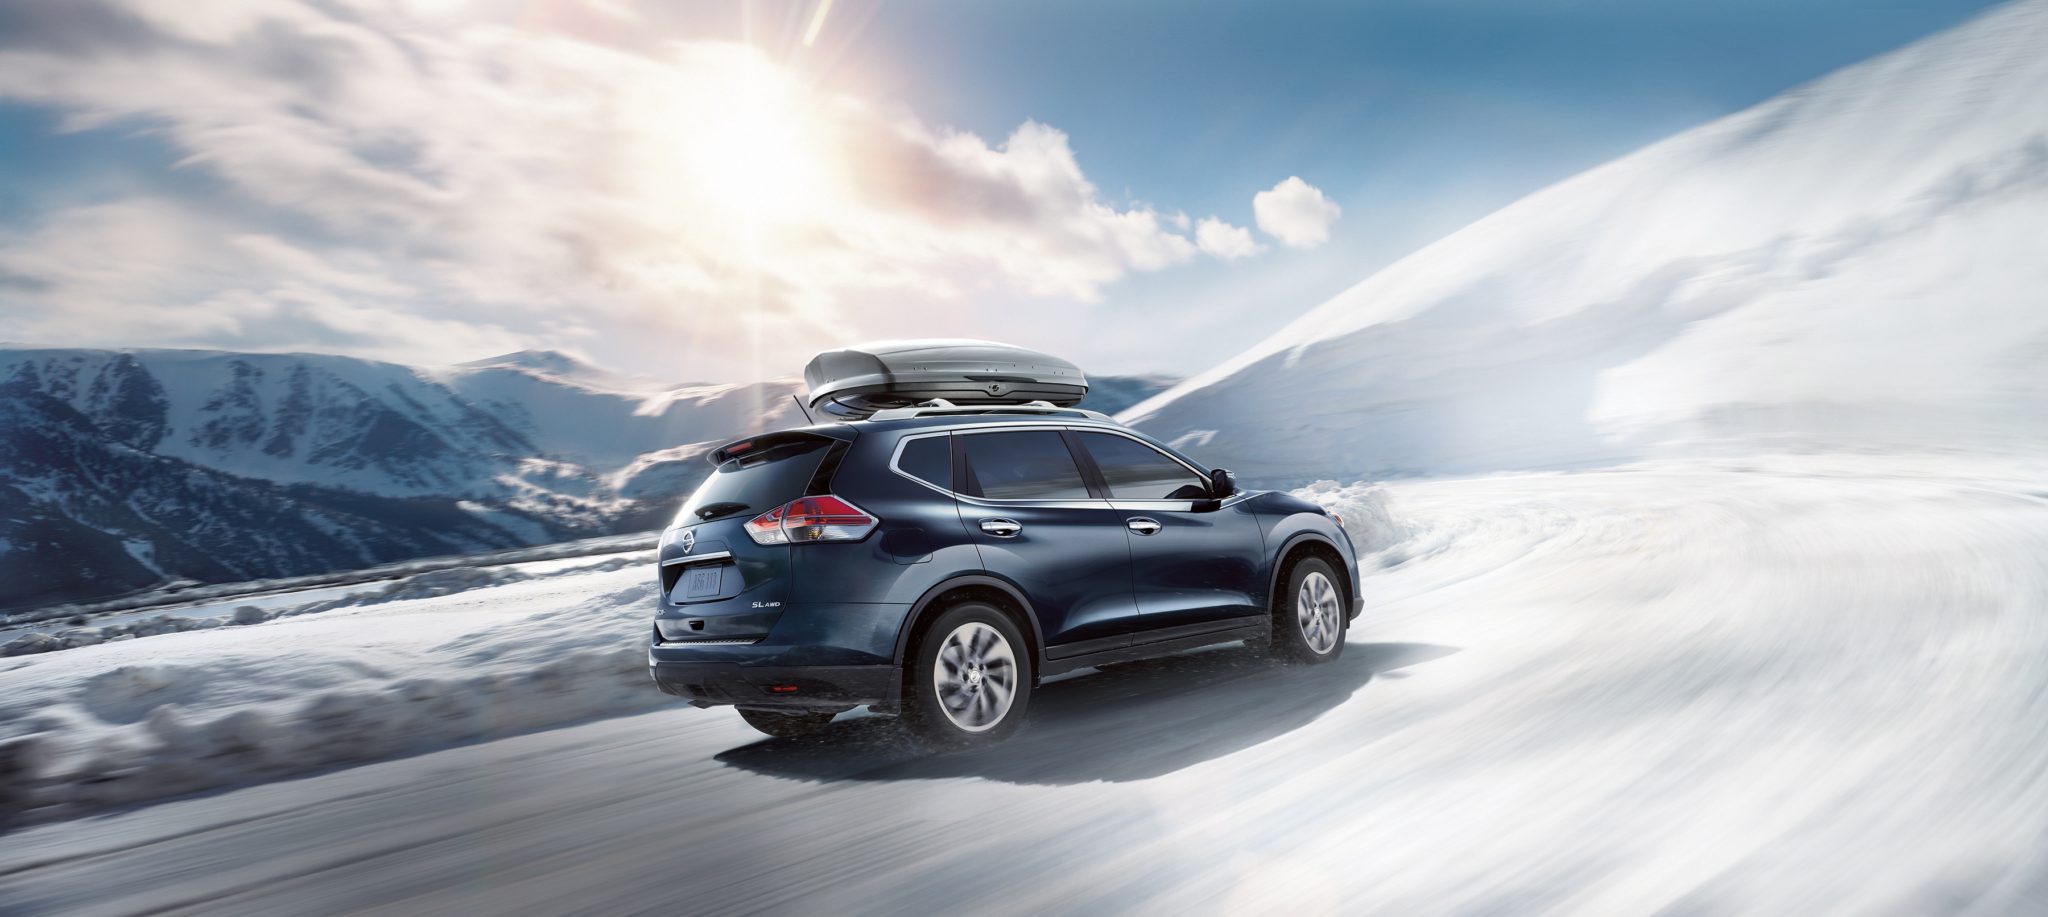 2015 Nissan Murano Vs 2015 Nissan Rogue Double The Pleasure And Double